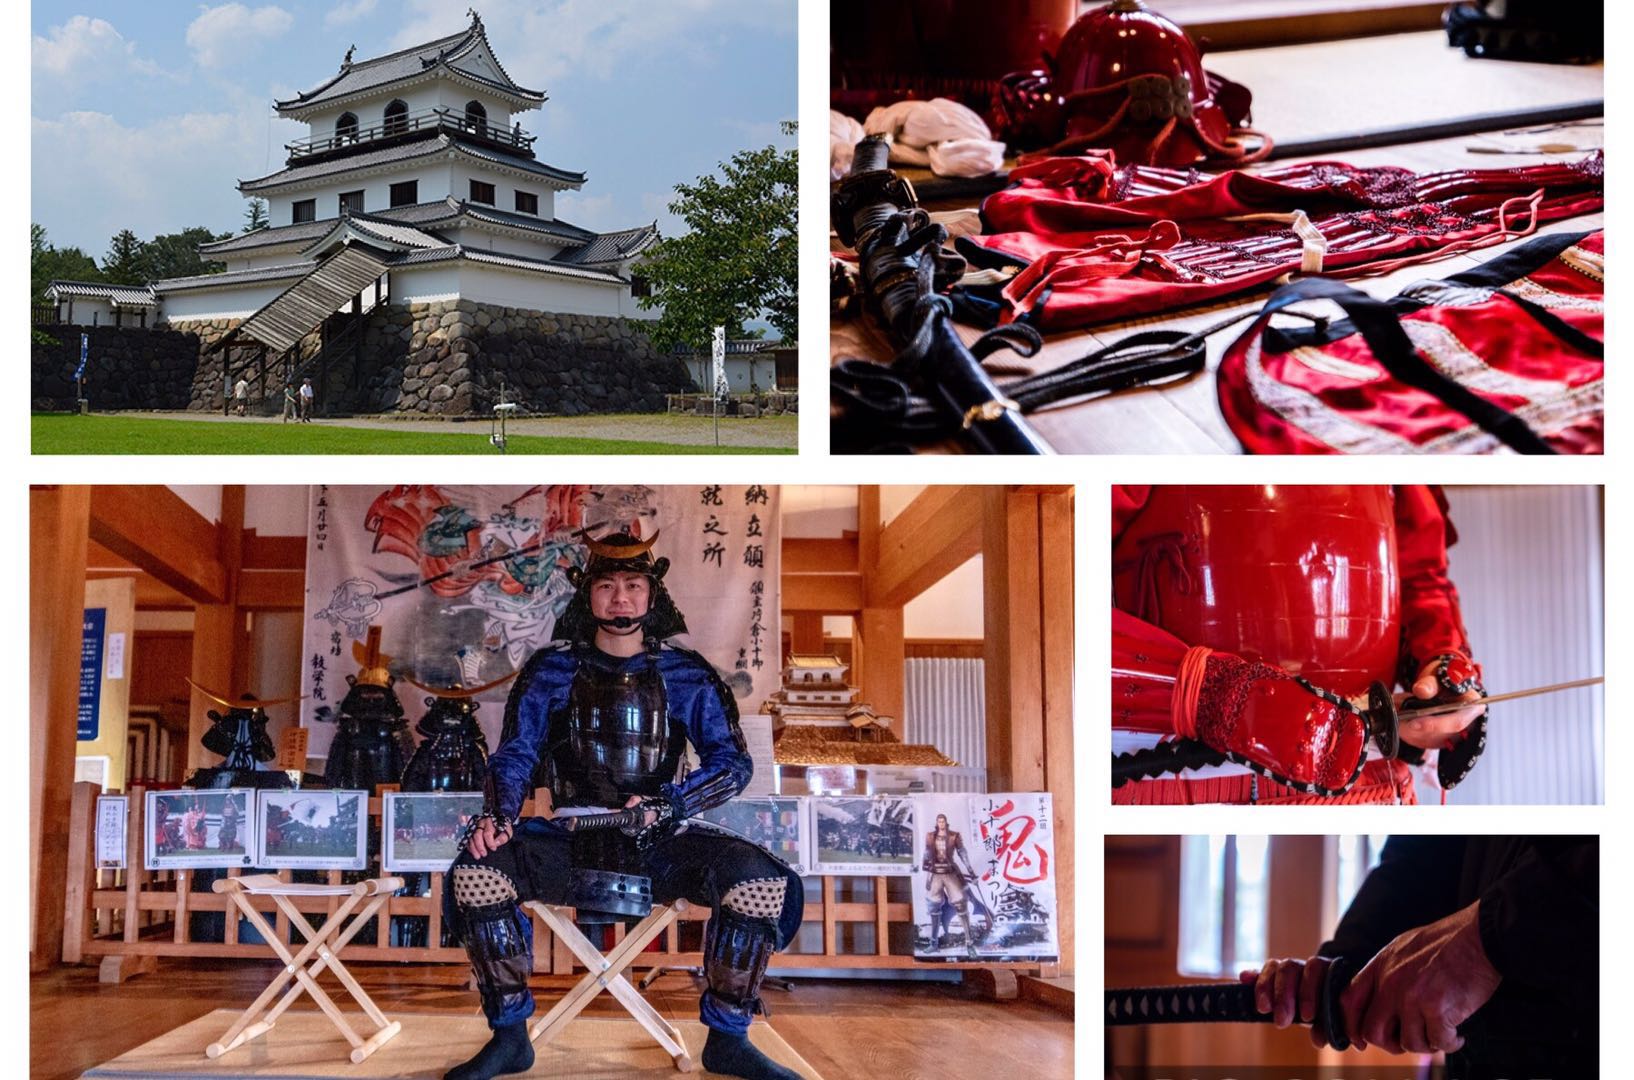 Won’t you try wearing real armor at Shiroishi Castle?